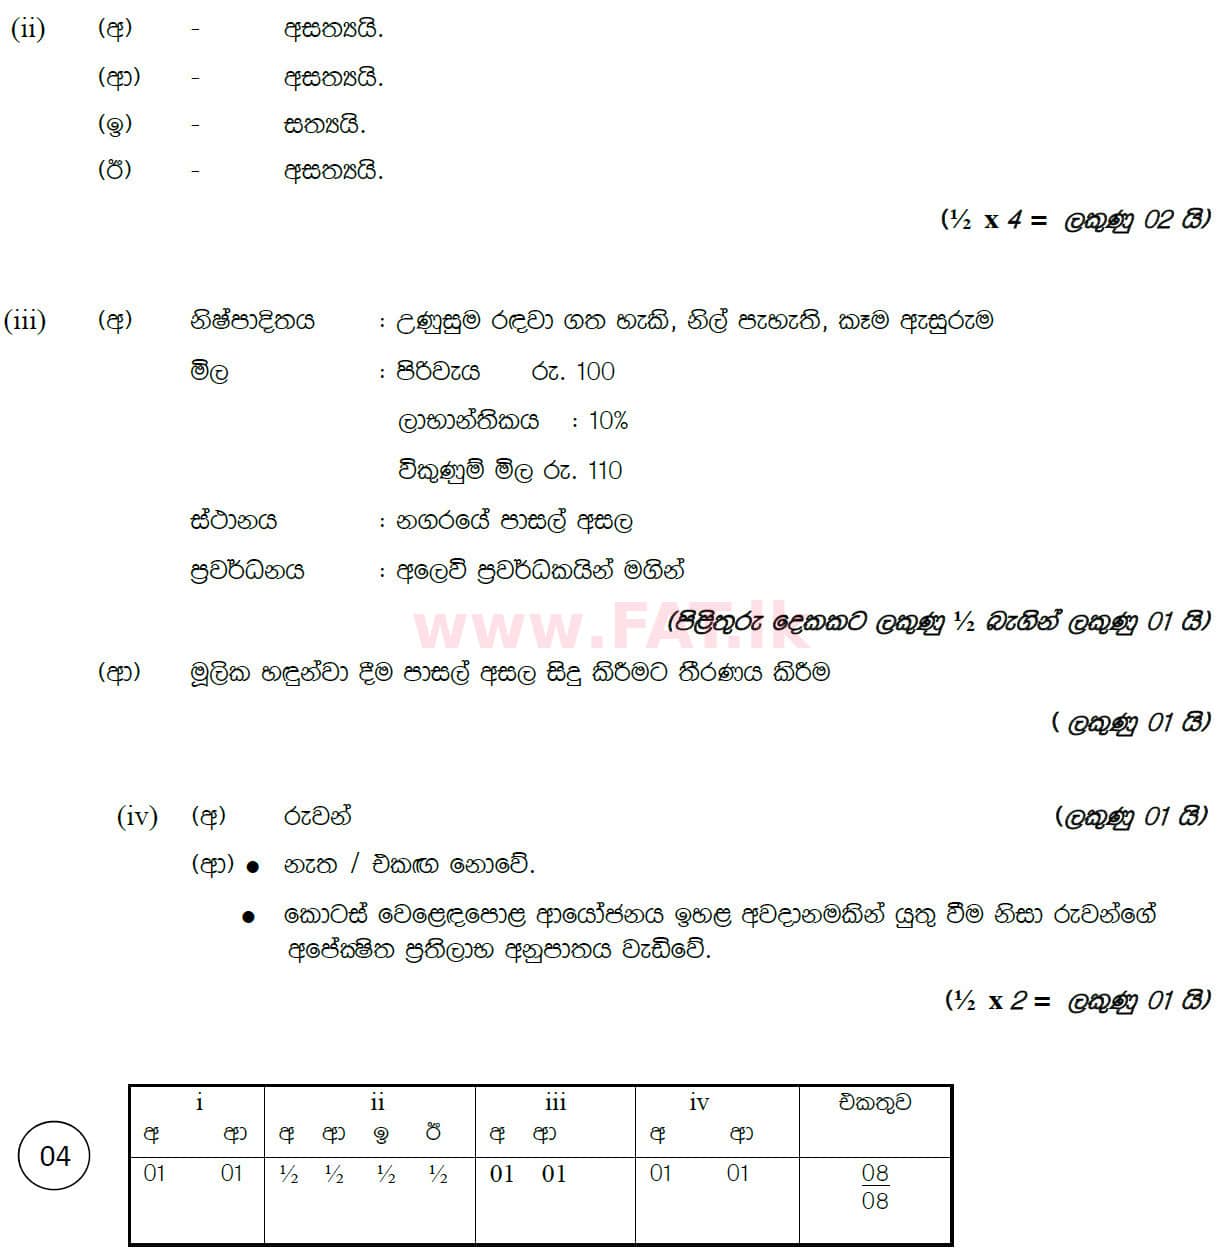 National Syllabus : Ordinary Level (O/L) Business and Accounting Studies - 2019 March - Paper II (සිංහල Medium) 4 5894